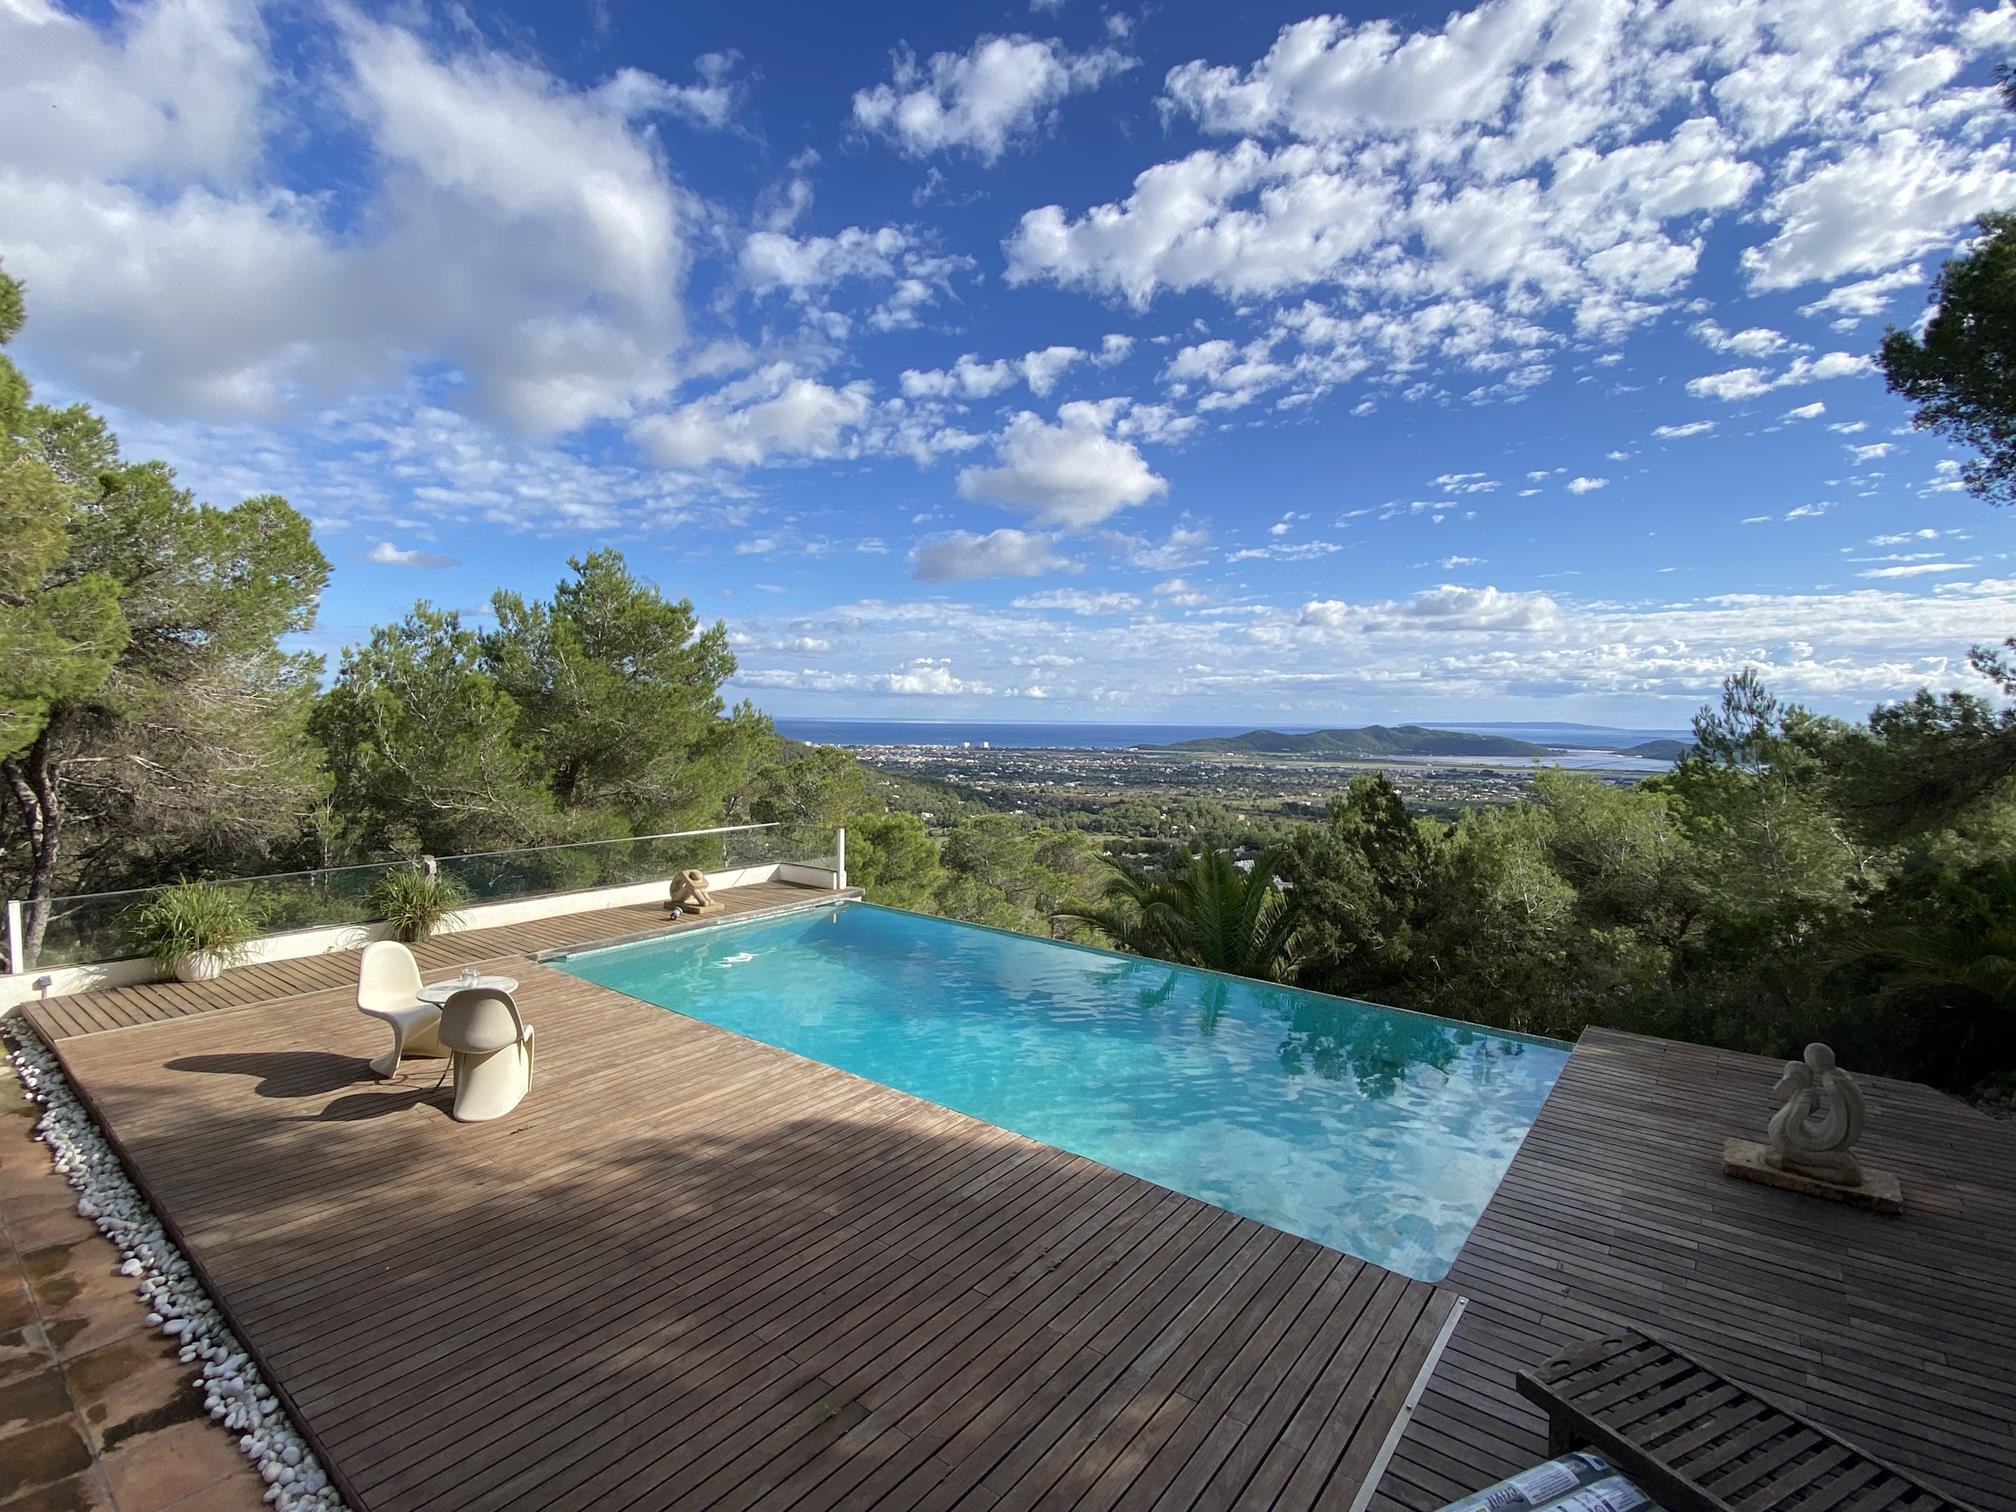 Charming villa with panoramic views of the sea and countryside